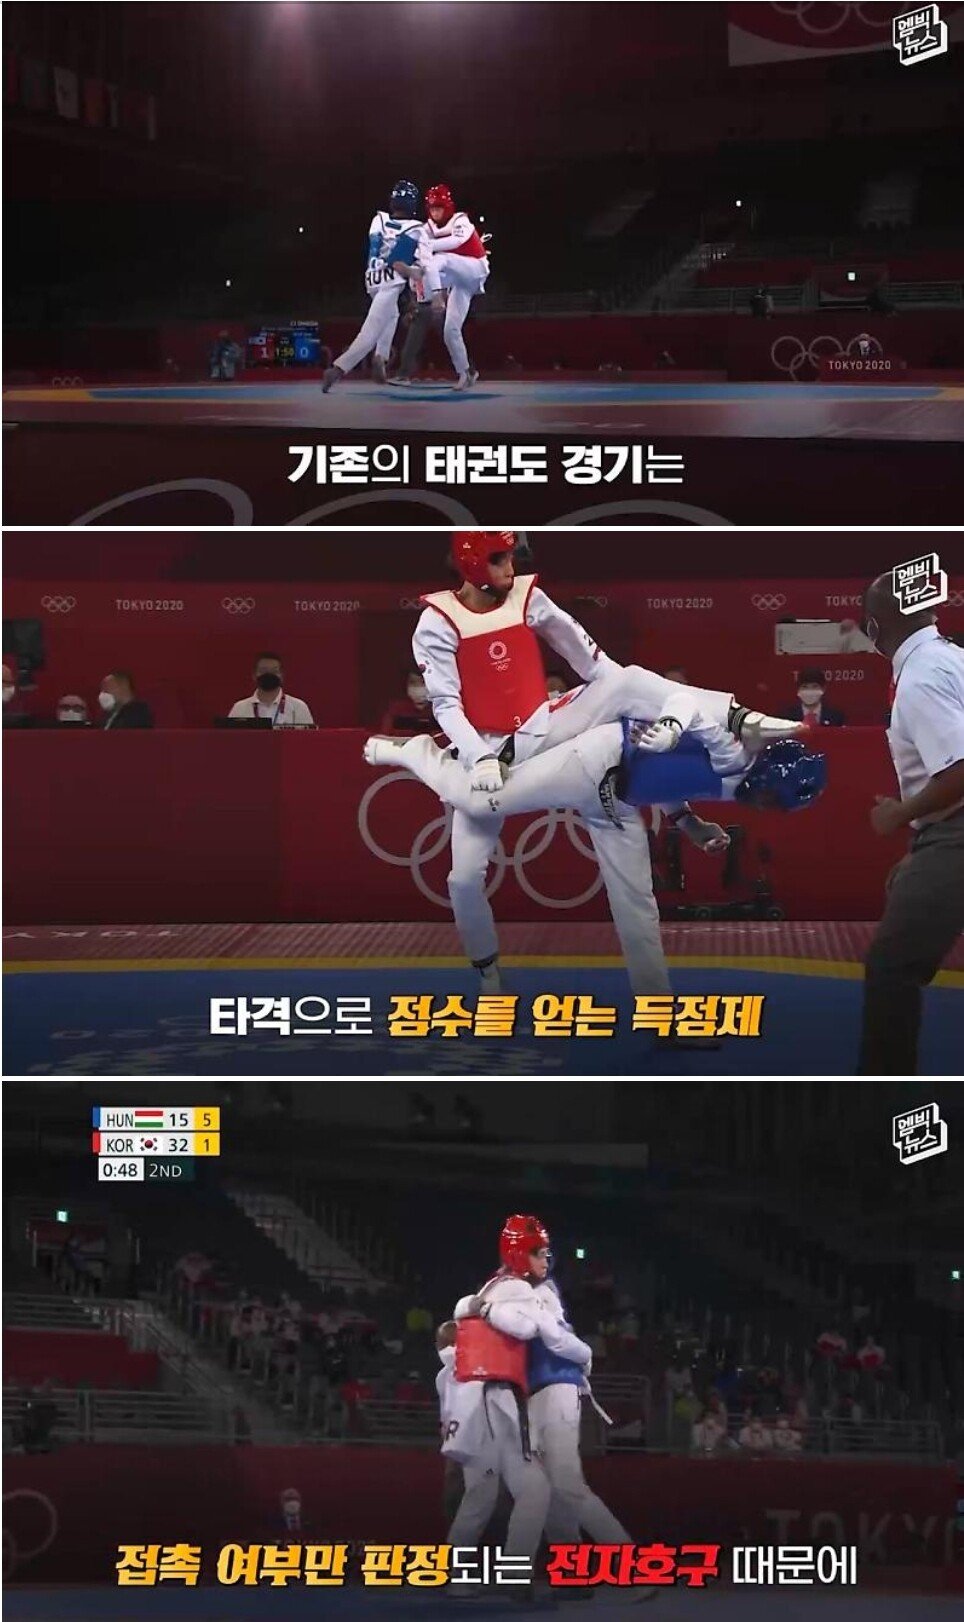 Taekwondo introduced a fighting game physical fitness system.